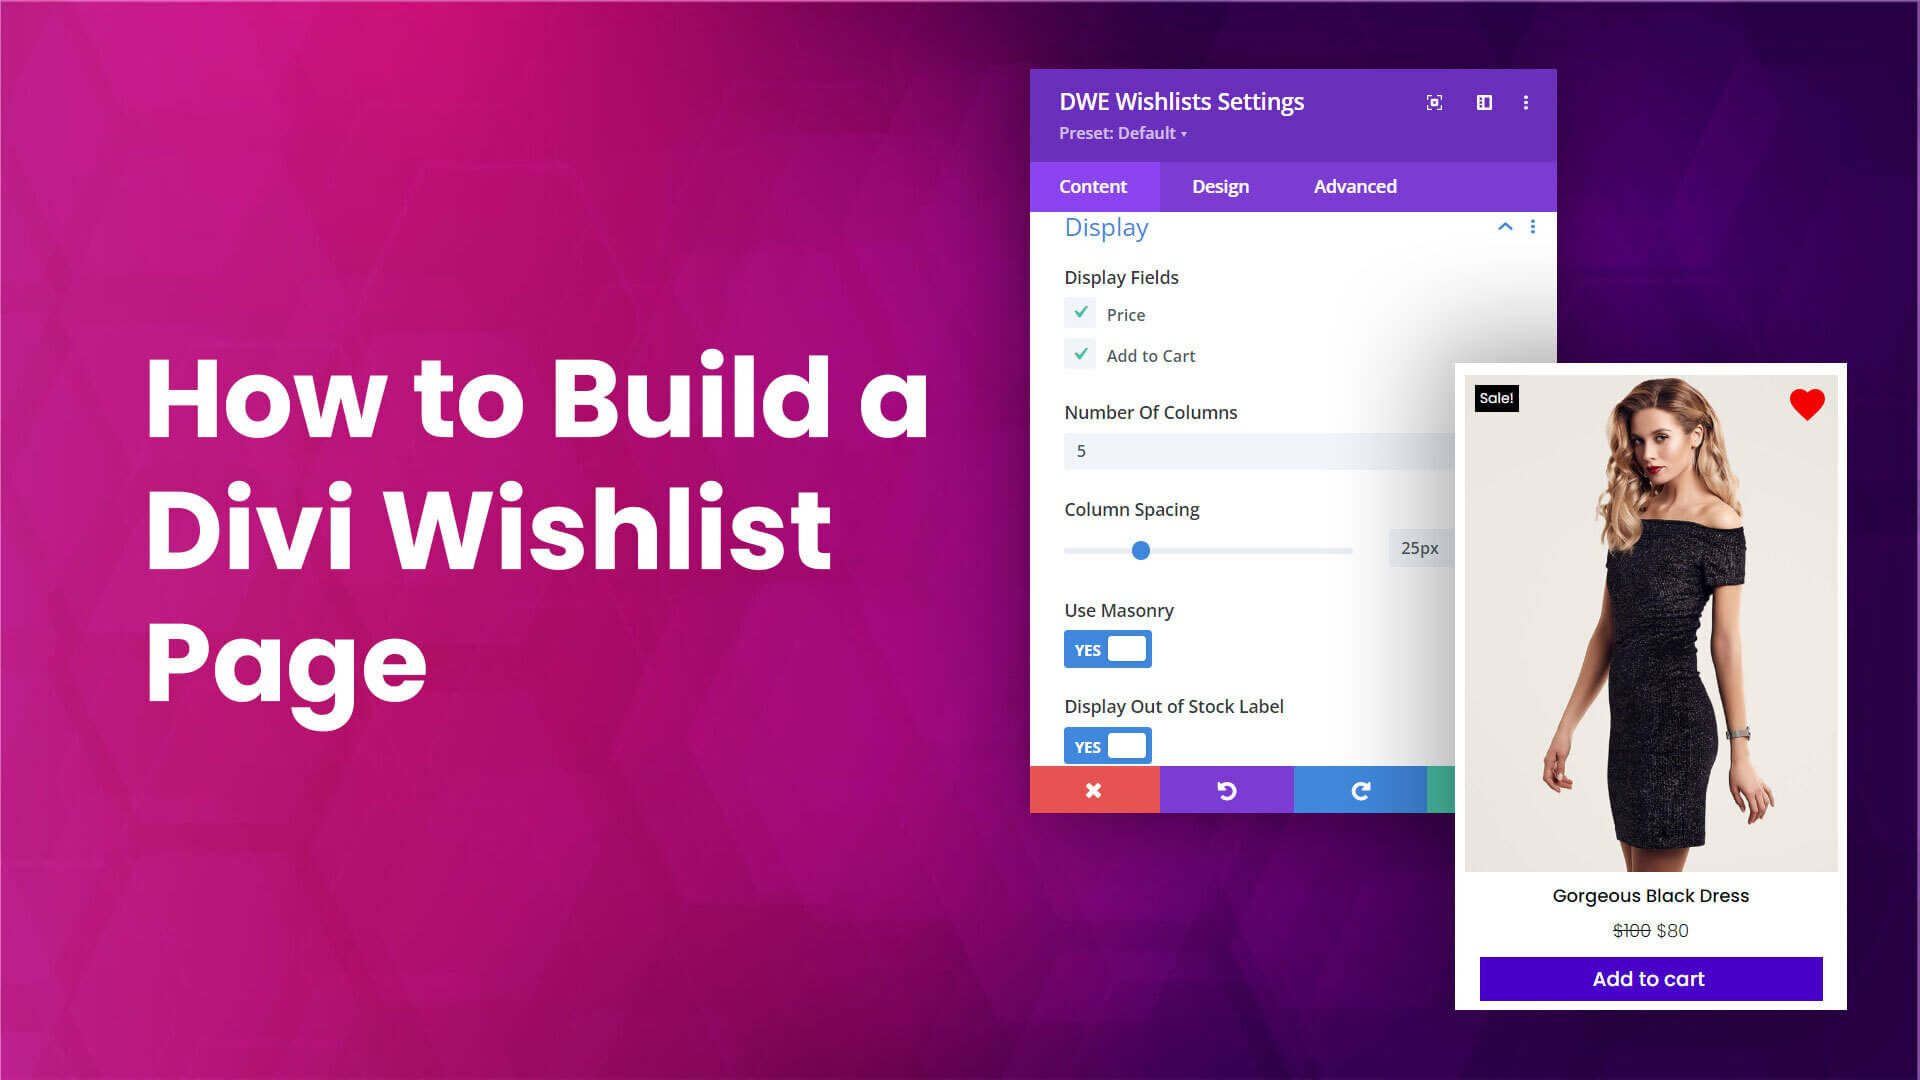 How to Build a Divi Wishlist Page